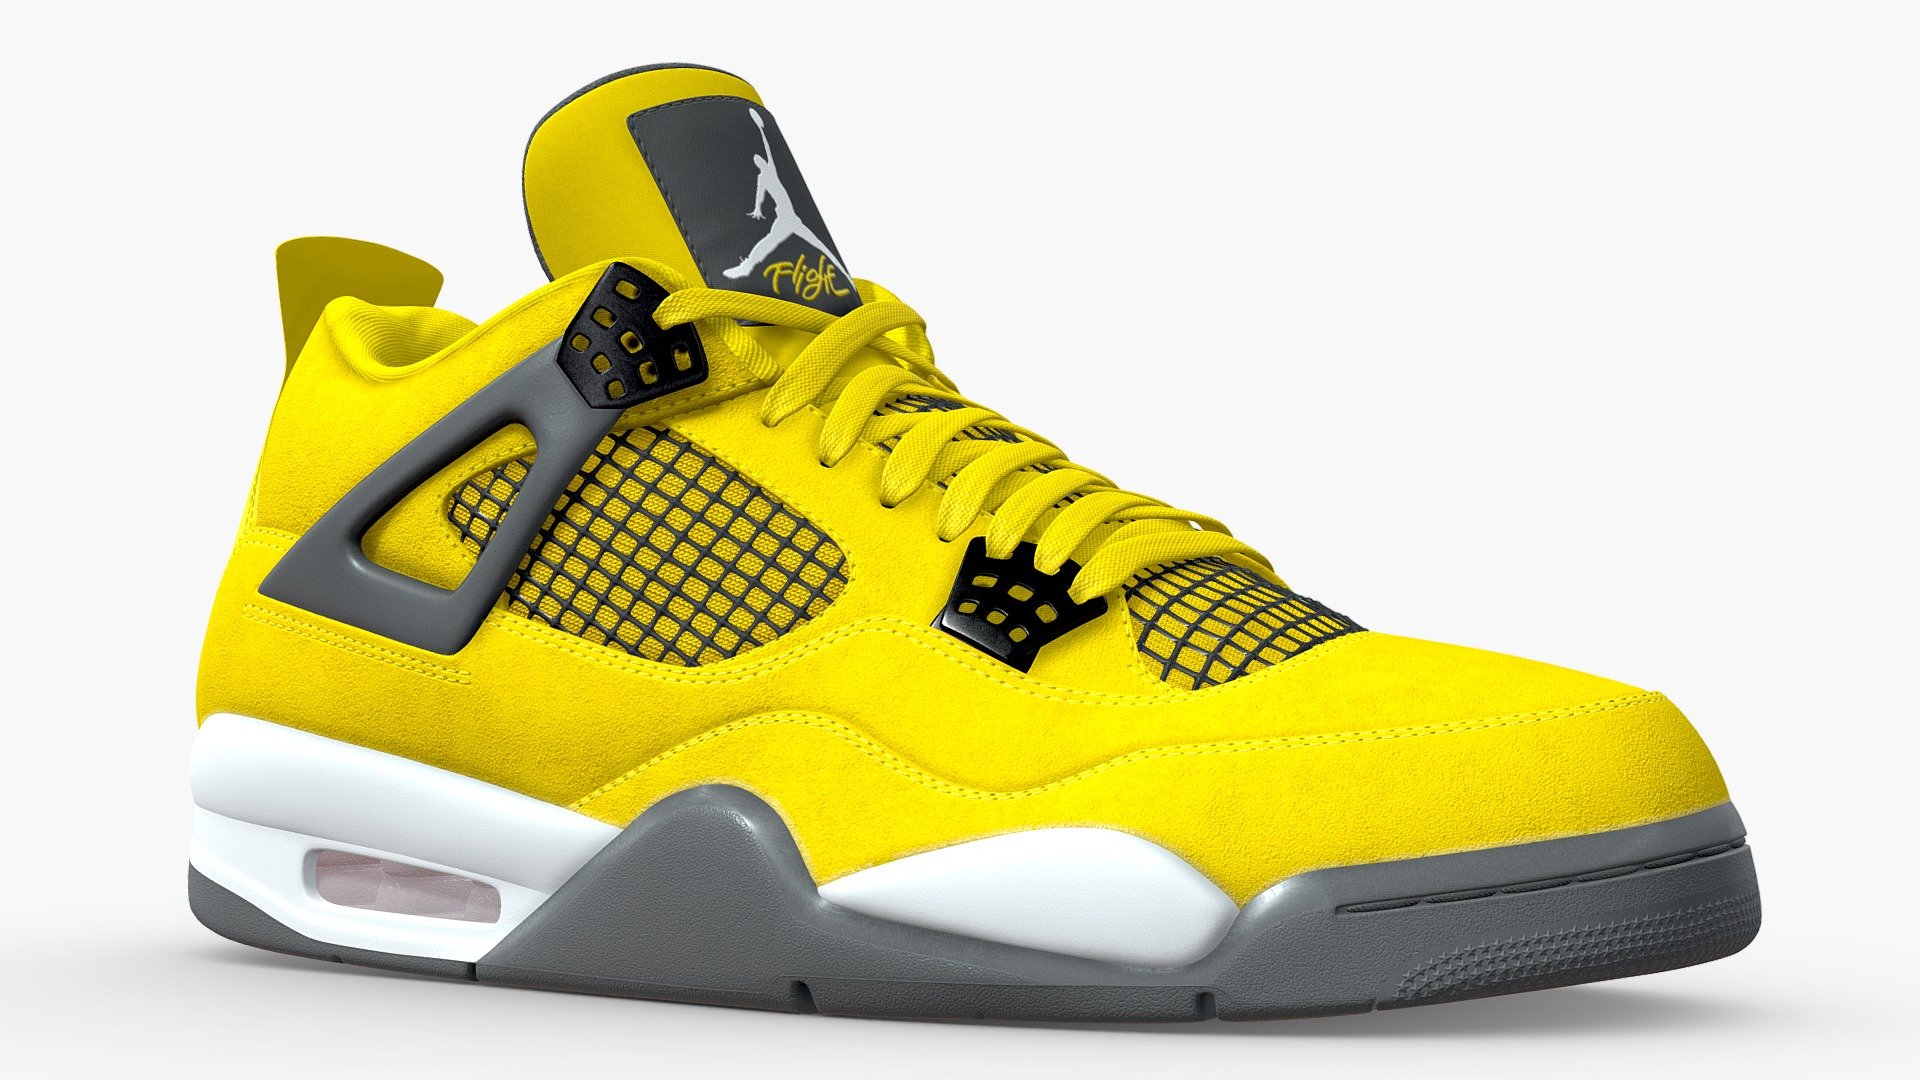 Iconic Jordan shoe in a vibrant, striking colourway. This model is an adaption of the Jordan 4 Lightning that released in 2021, the colour blocking remains faithful, however, the silohouette is in line with a standard jumpman Jordan 4, and not the type the real life counterpart uses. Nonetheless I hope you like it.

This model is a 1:1 replication of the original. All dimensions, angles, and curves are the same as the real life counterpart. The shoe is subdivision ready with a base polycount of 56,640 polys per shoe. The mesh uses four texture sets, all at 4096x4096 resolution, with the following maps in use: Base Color, Metallic, Roughness, Normal. The base color map contains the transparency information.

There is an optimized, One Mesh version which has a lower polycount, 25,872 polys per shoe. This was achieved by removing small stitches and smoothing out the sole of the shoe

The main Blender files contain the full texture setup 3d model